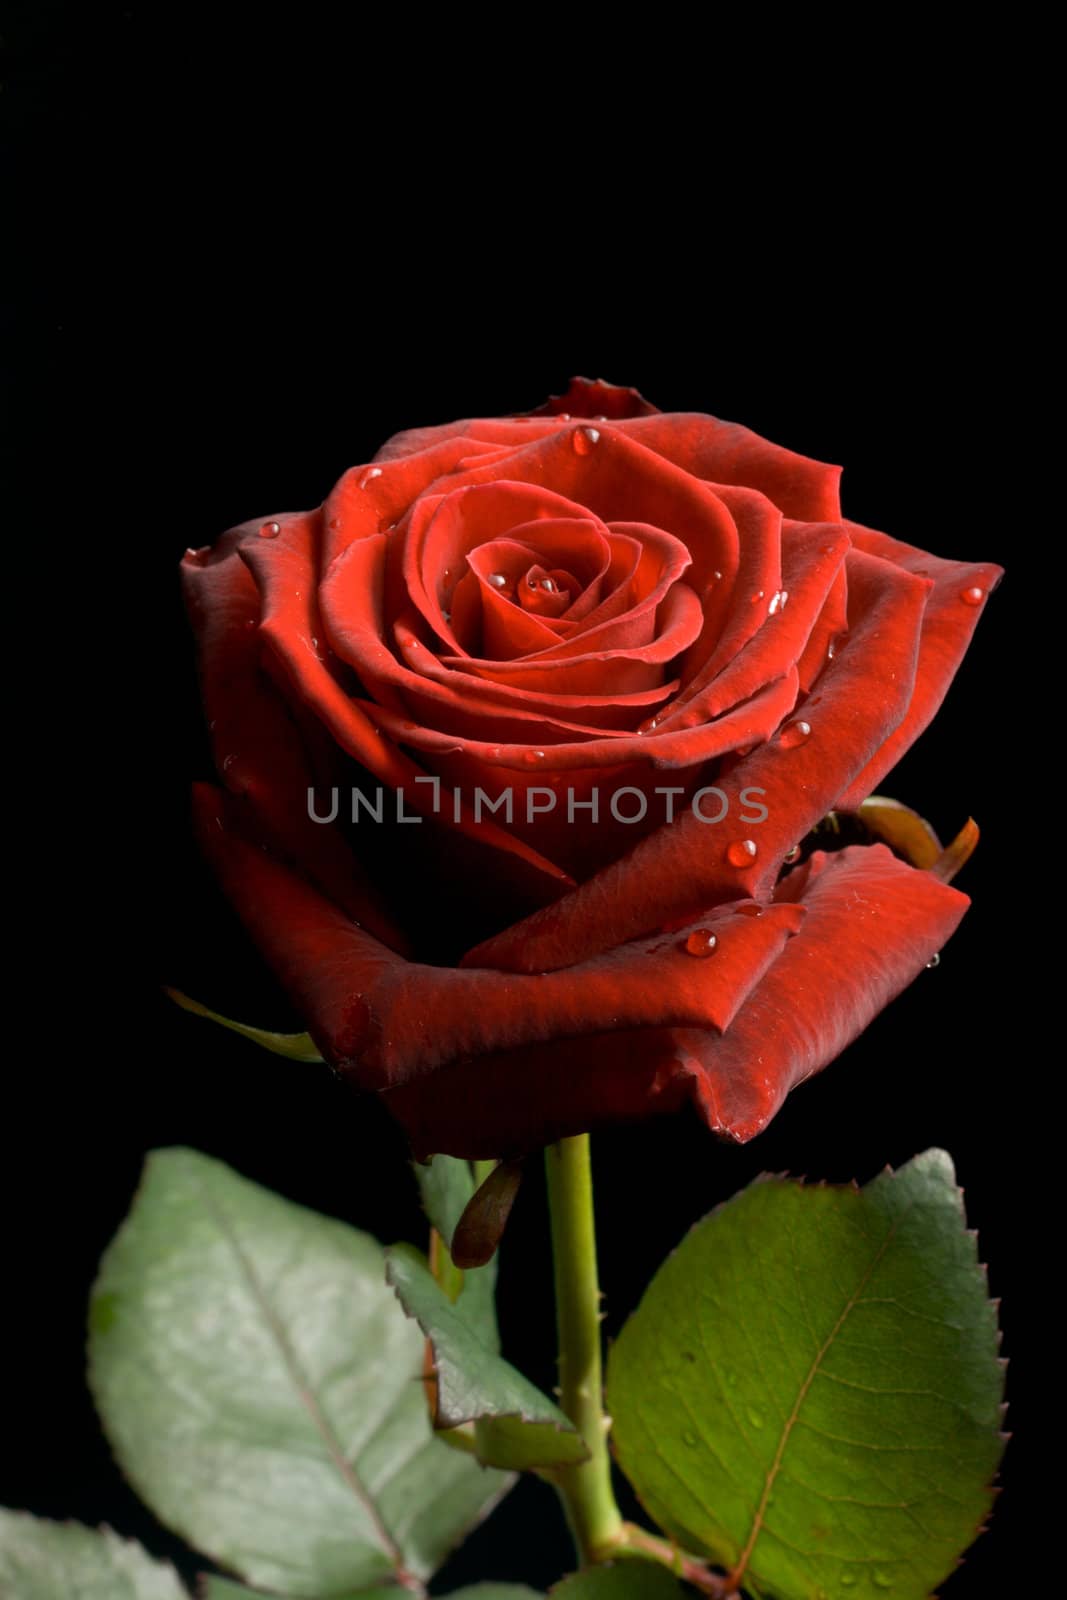 Red rose with drops of water on black background by dimol